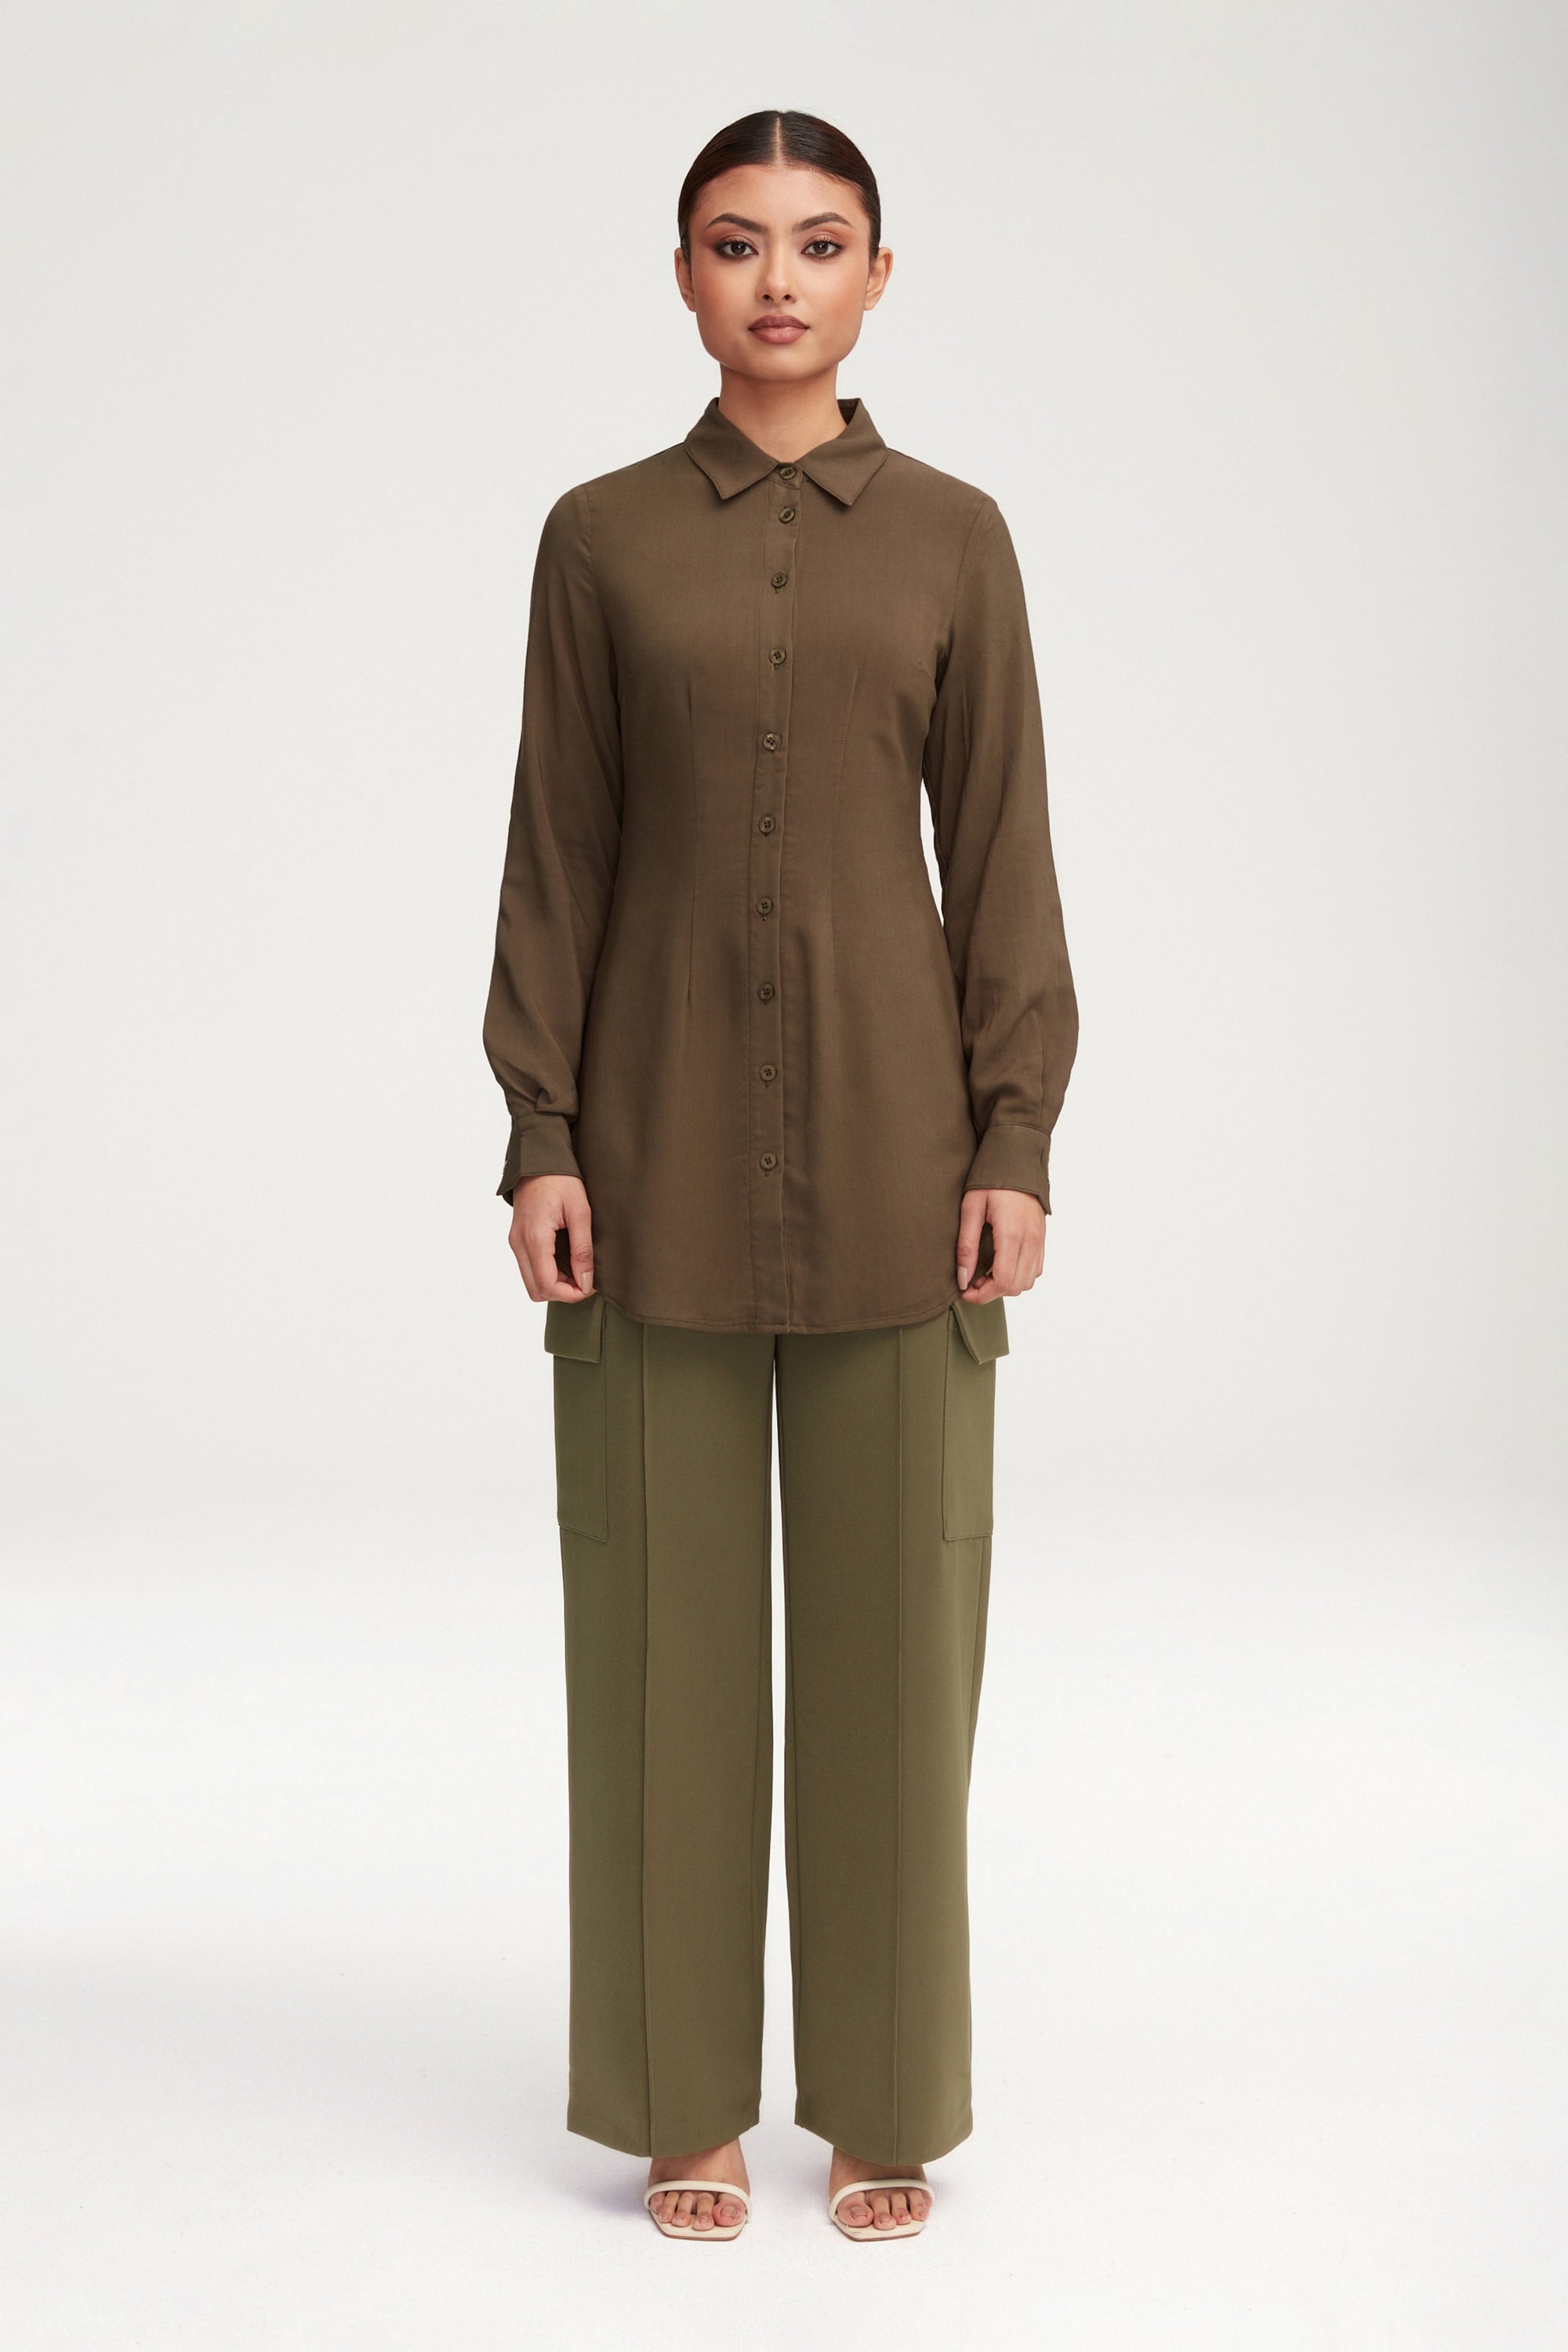 Sarah Fitted Button Down Top - Dark Olive Clothing epschoolboard 